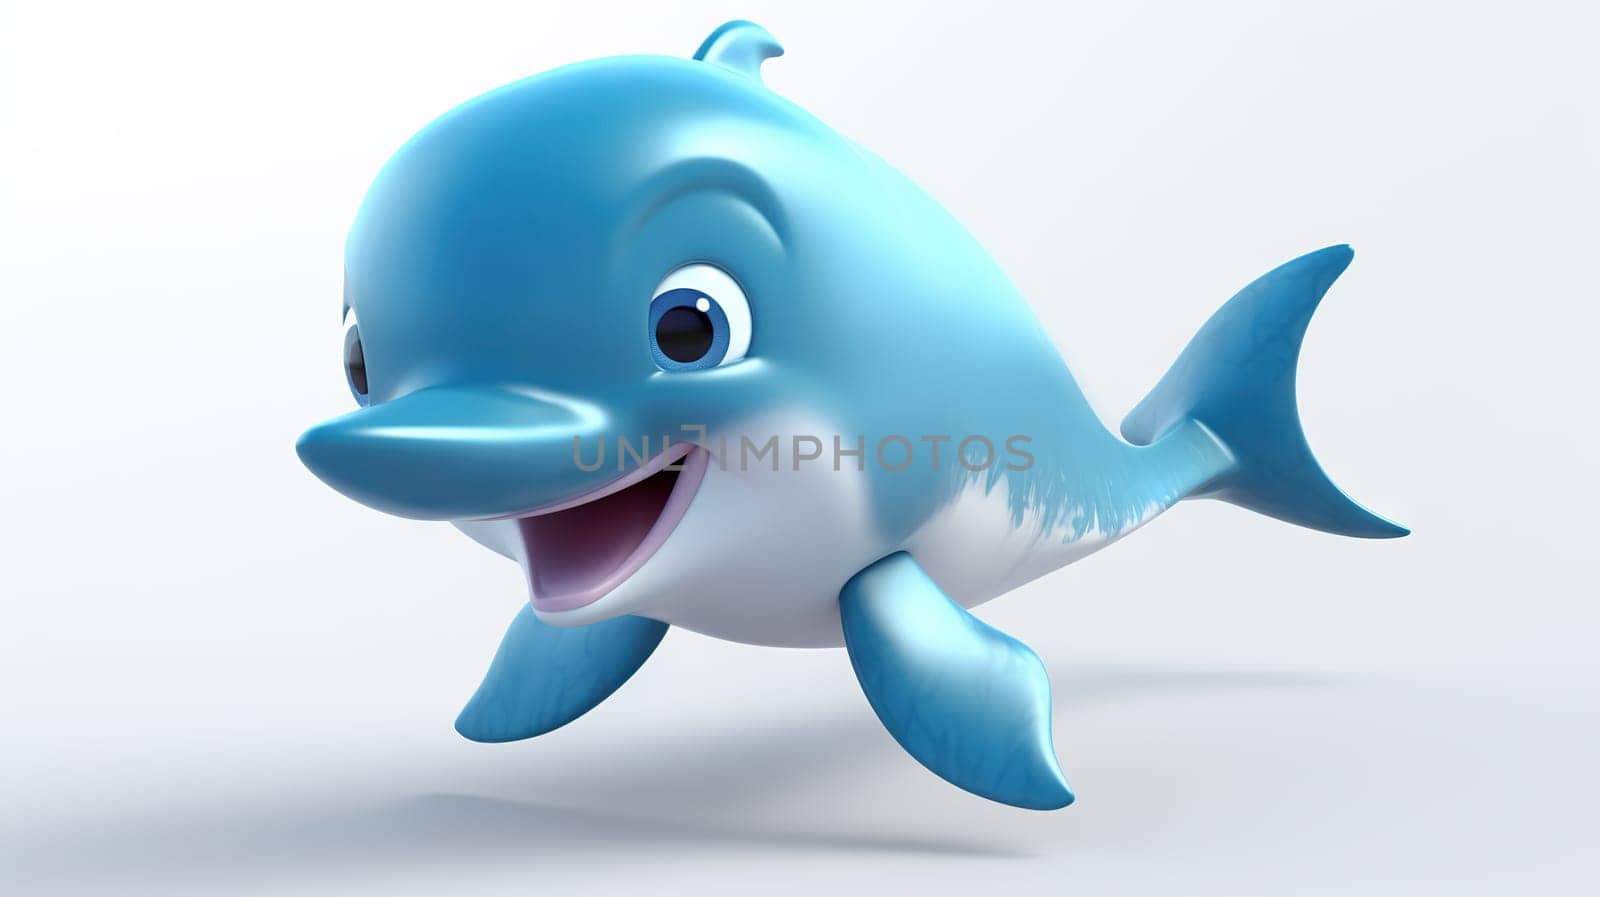 illustration of a playful dolphin against white background , radiating joy and friendliness in an underwater scene